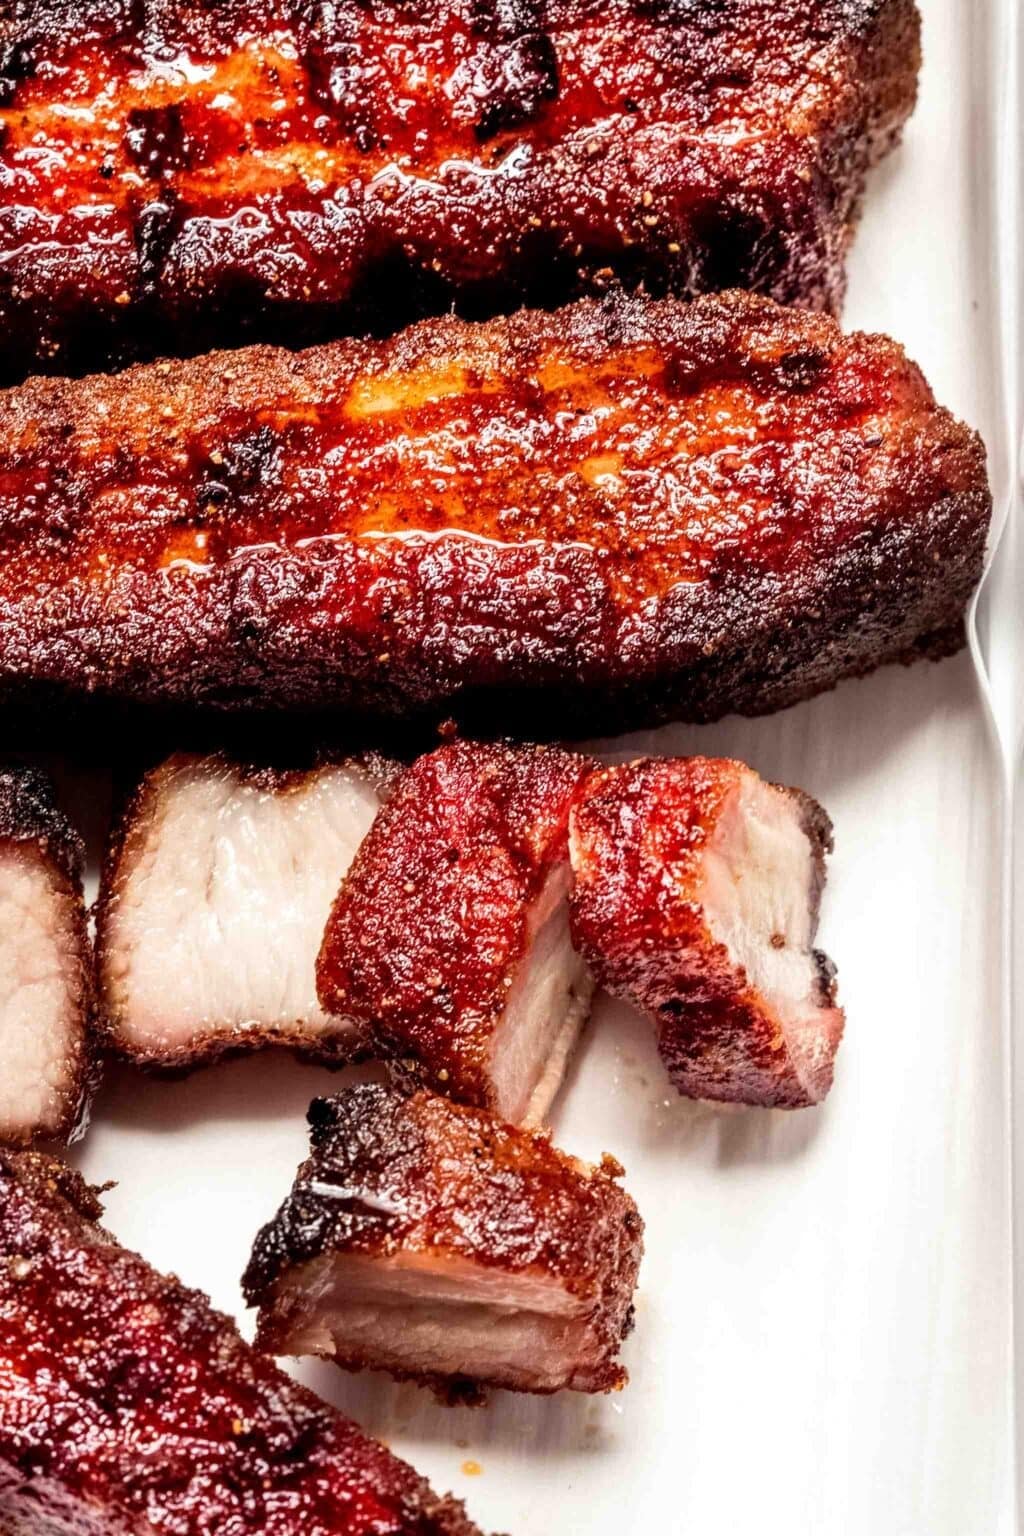 Smoked Pork Belly Slices